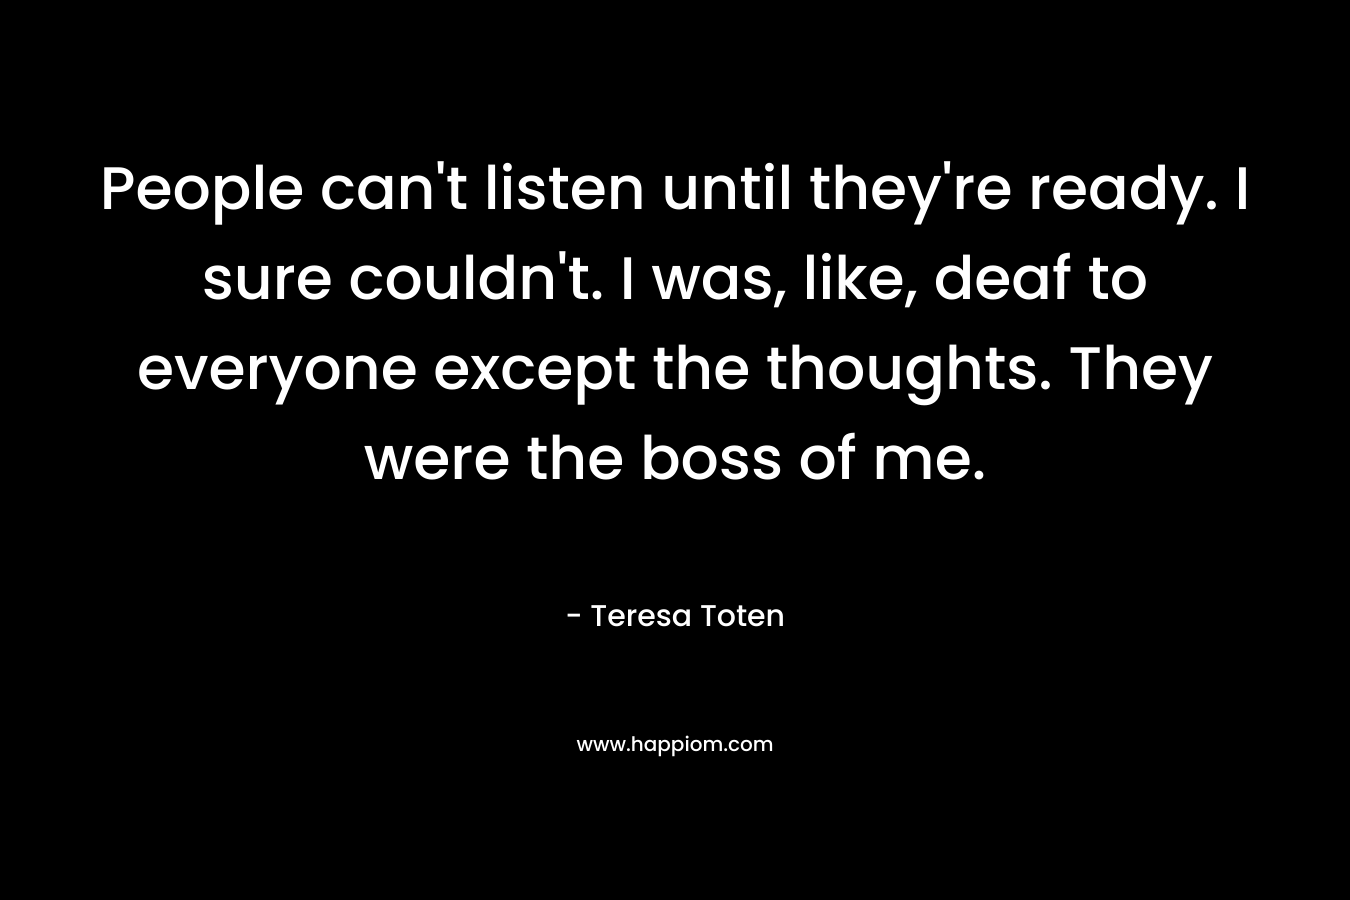 People can’t listen until they’re ready. I sure couldn’t. I was, like, deaf to everyone except the thoughts. They were the boss of me. – Teresa Toten